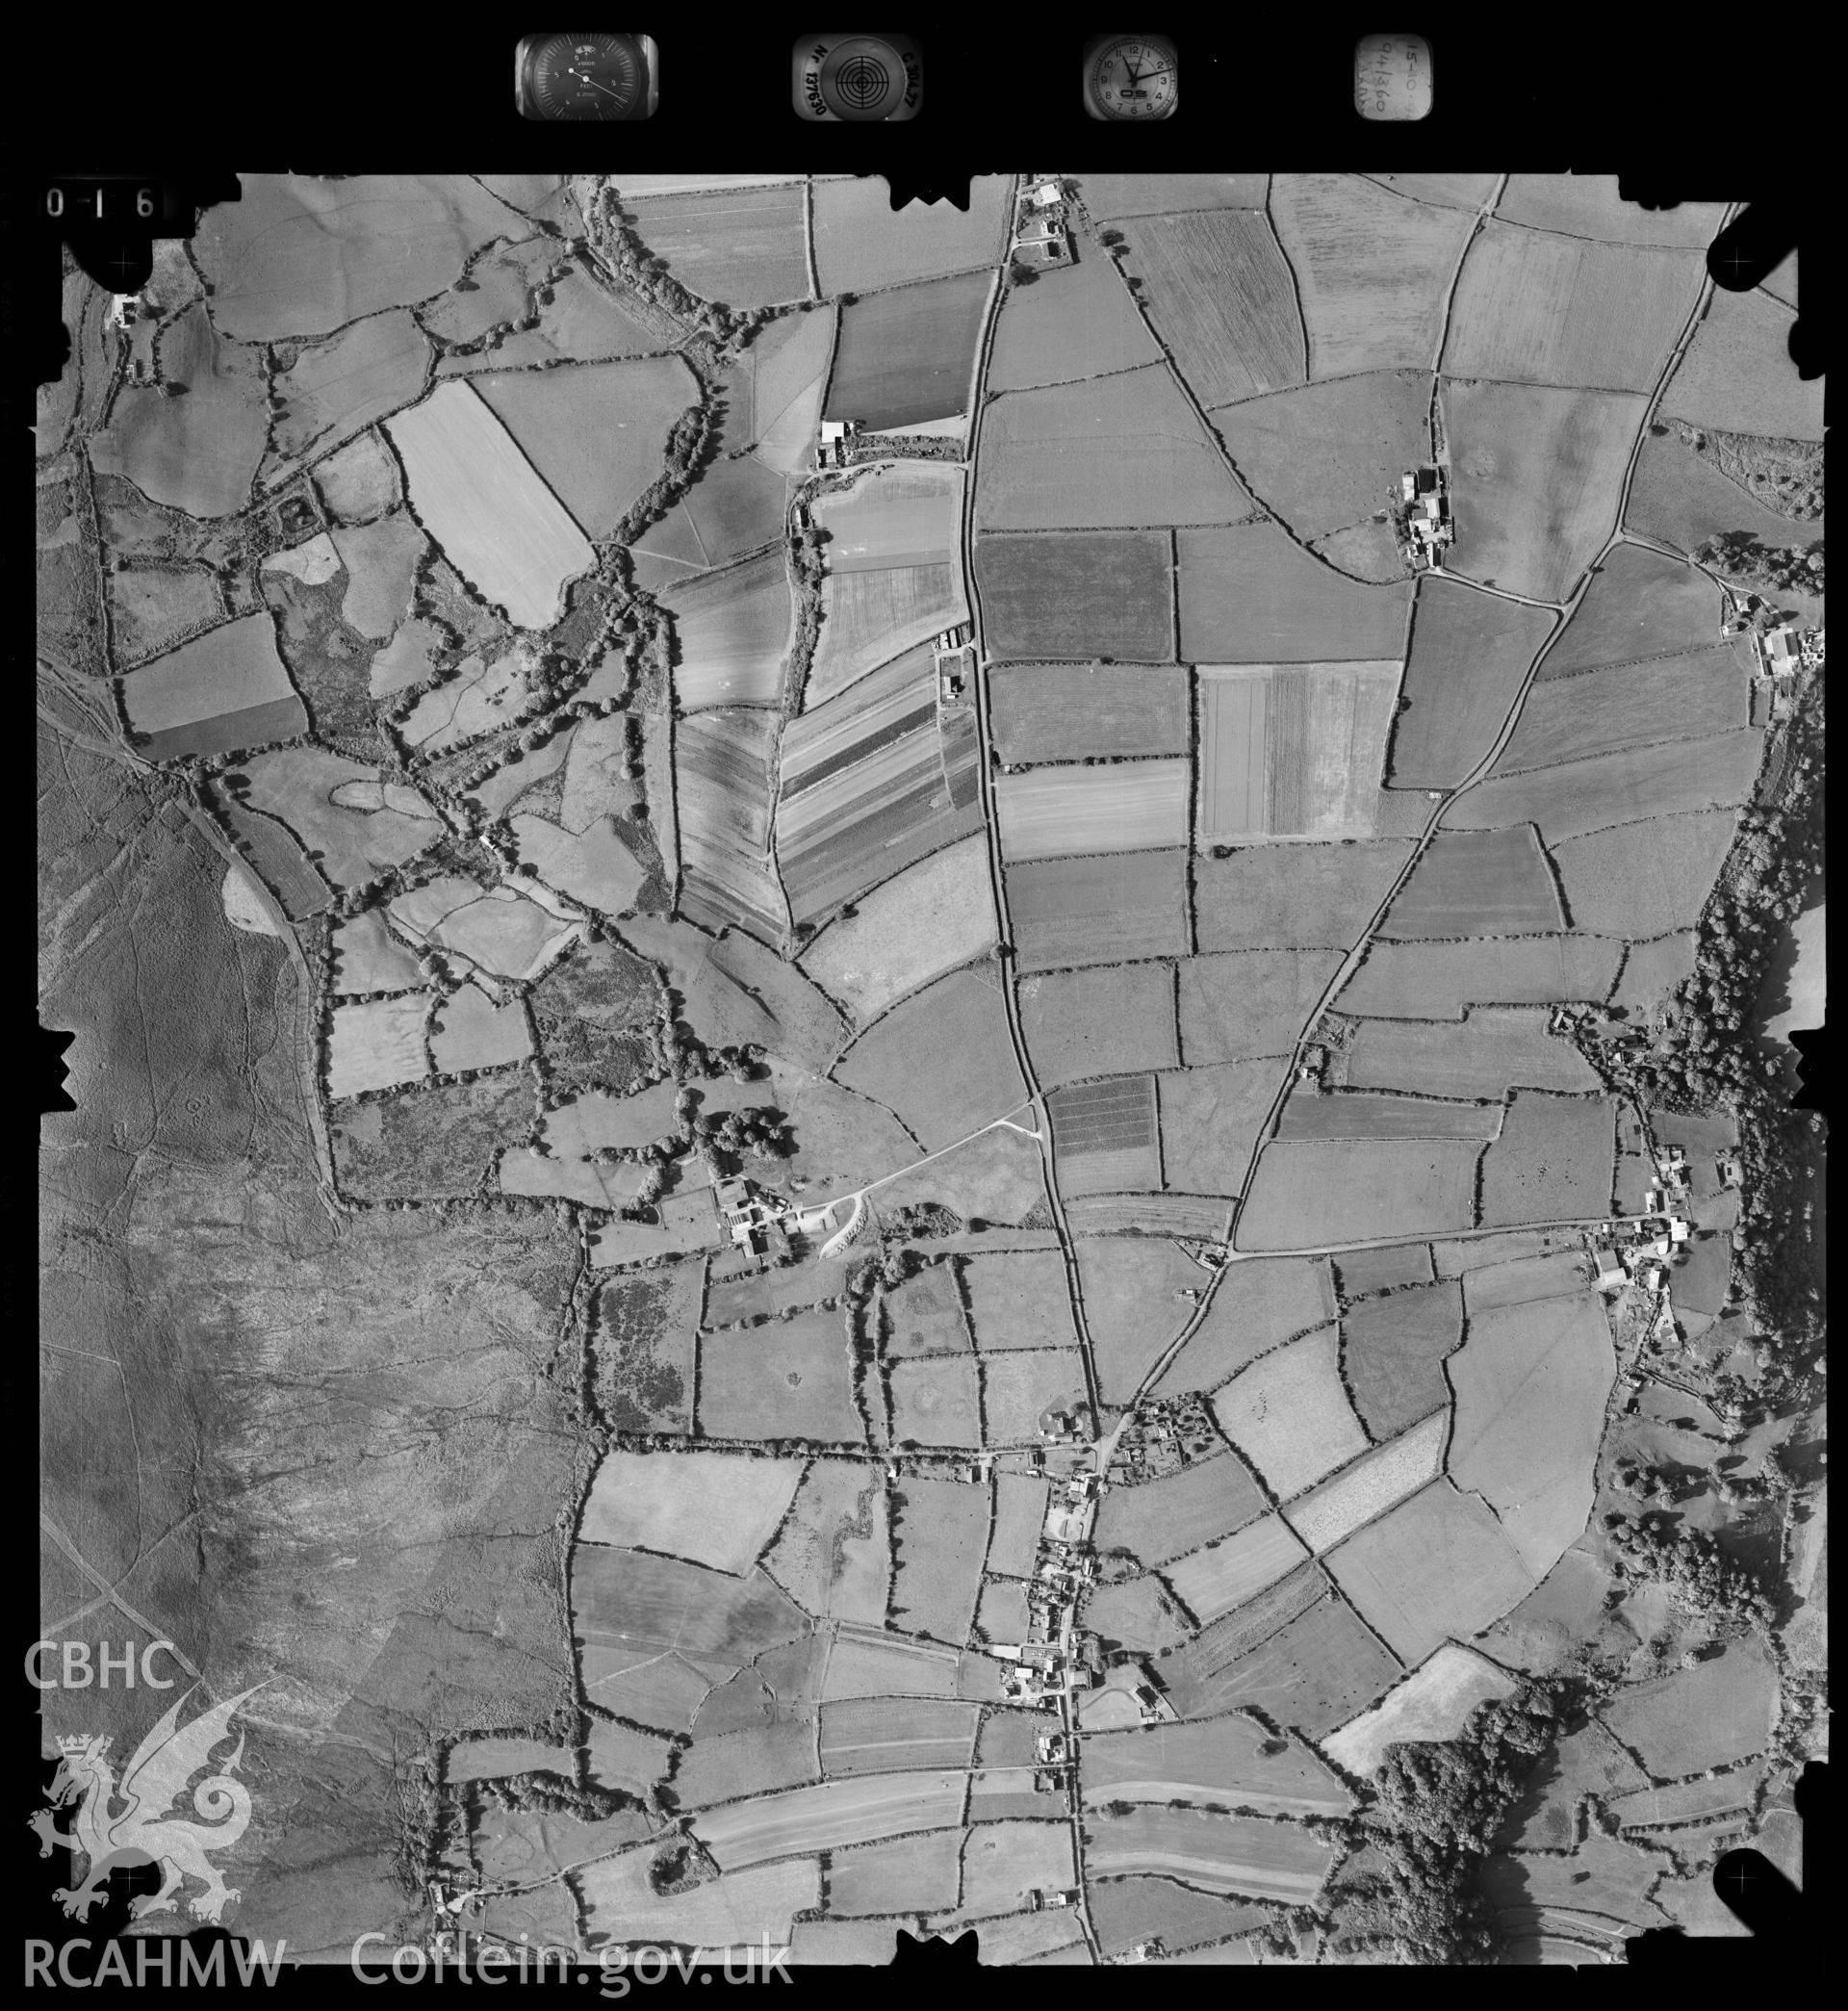 Digitized copy of an aerial photograph showing the Gower area, taken by Ordnance Survey, 1994.